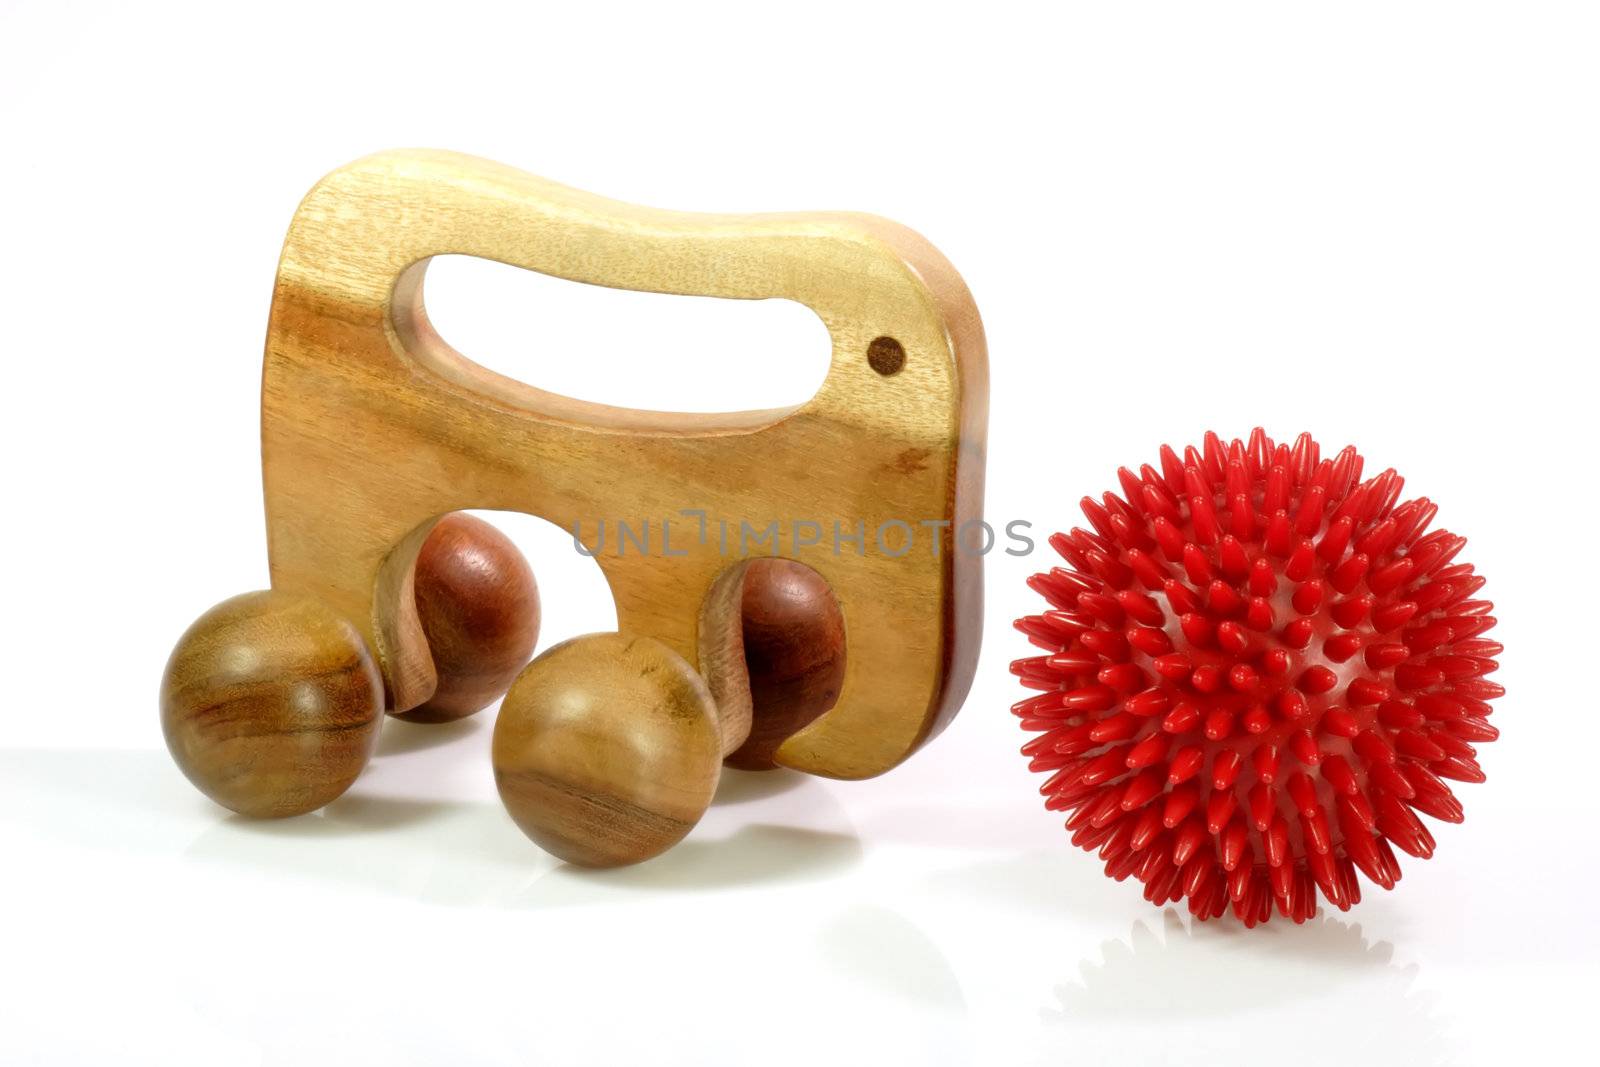 Massage implements on bright background